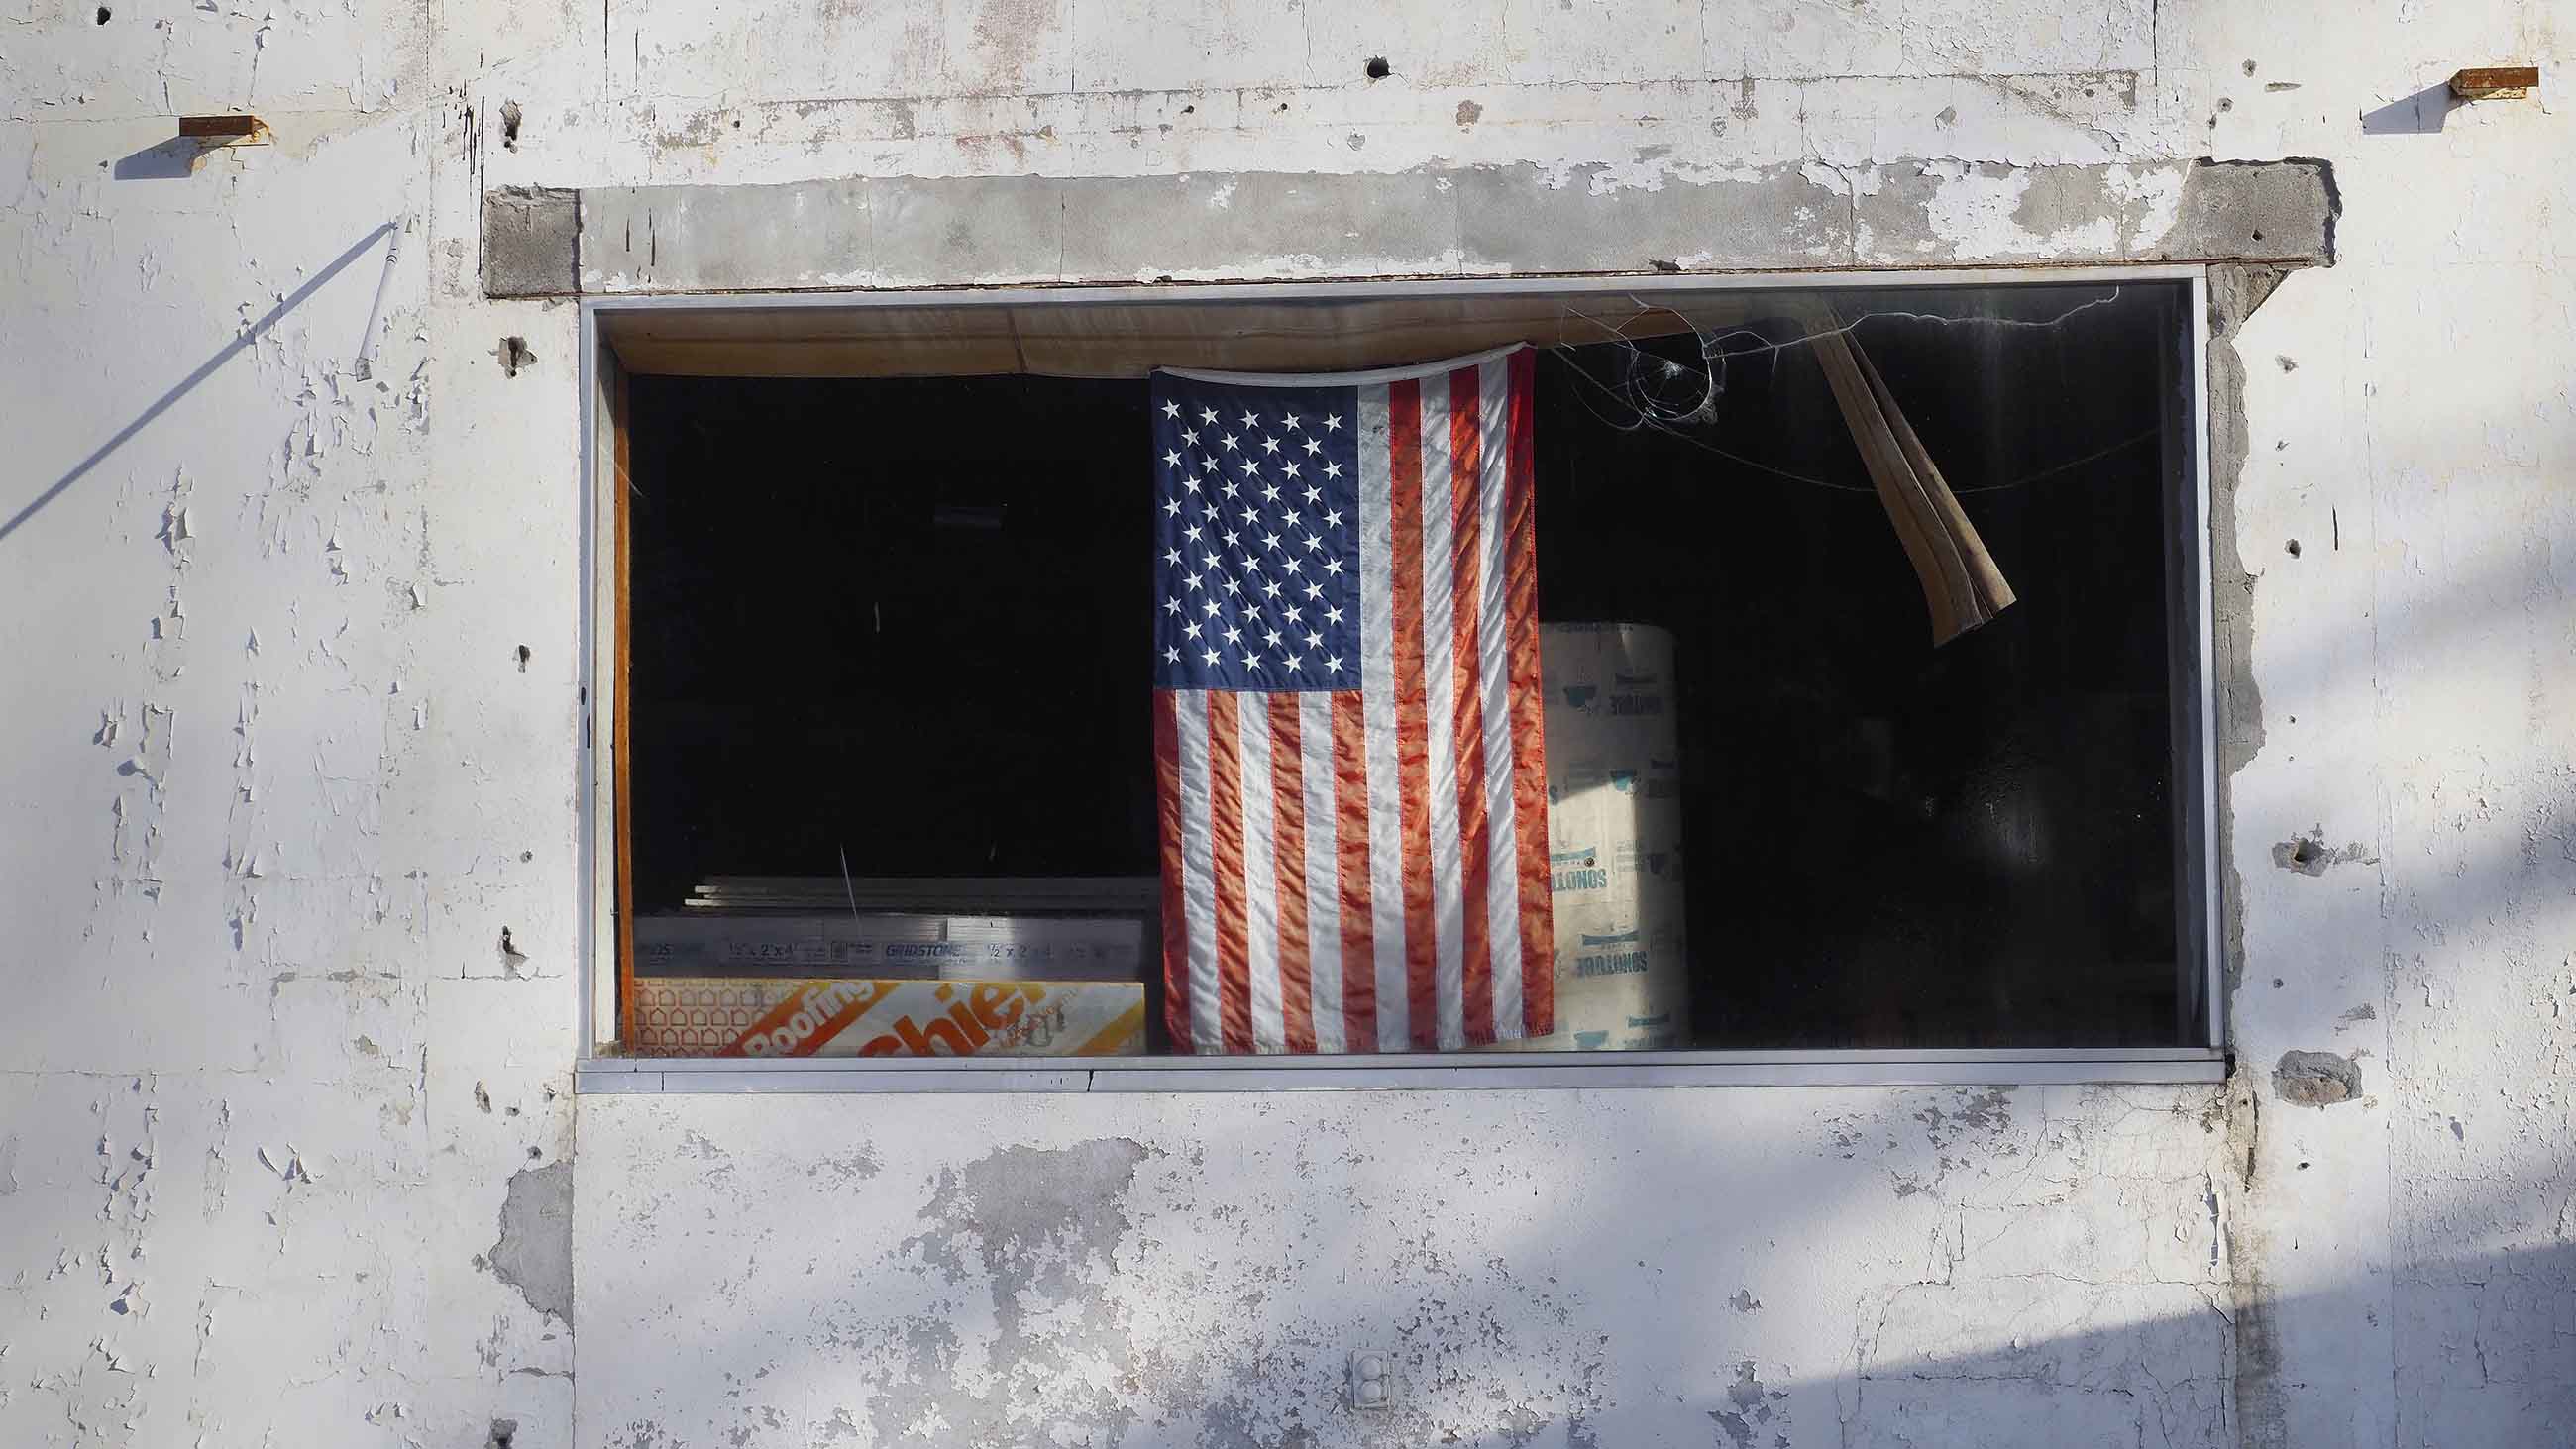 A flag hangs in the window of a small building on the grounds of the former Independent Leather Manufacturing Corp., one of about 28 Superfund and Brownfield sites in and around  Gloversville, New York. Image by Larry C. Price. United States, 2016. 